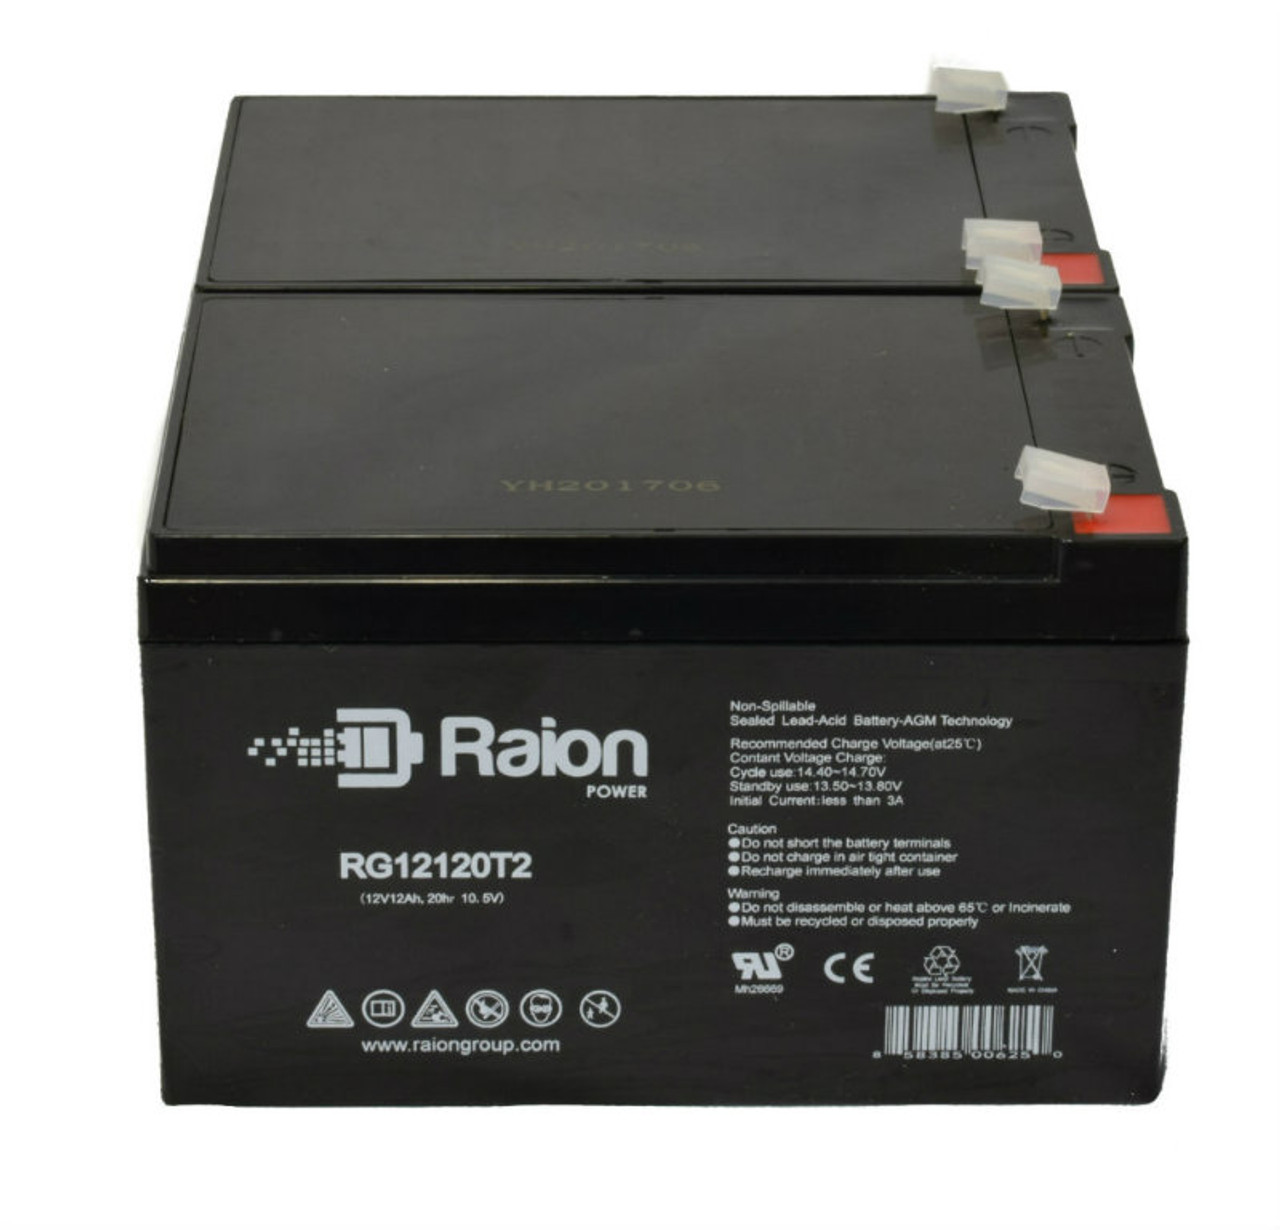 Raion Power RG12120T2 Replacement Battery Set for Pride Mobility Go-Go Ultra X - 4 wheel scooter Mobility Scooter - 2 Pack